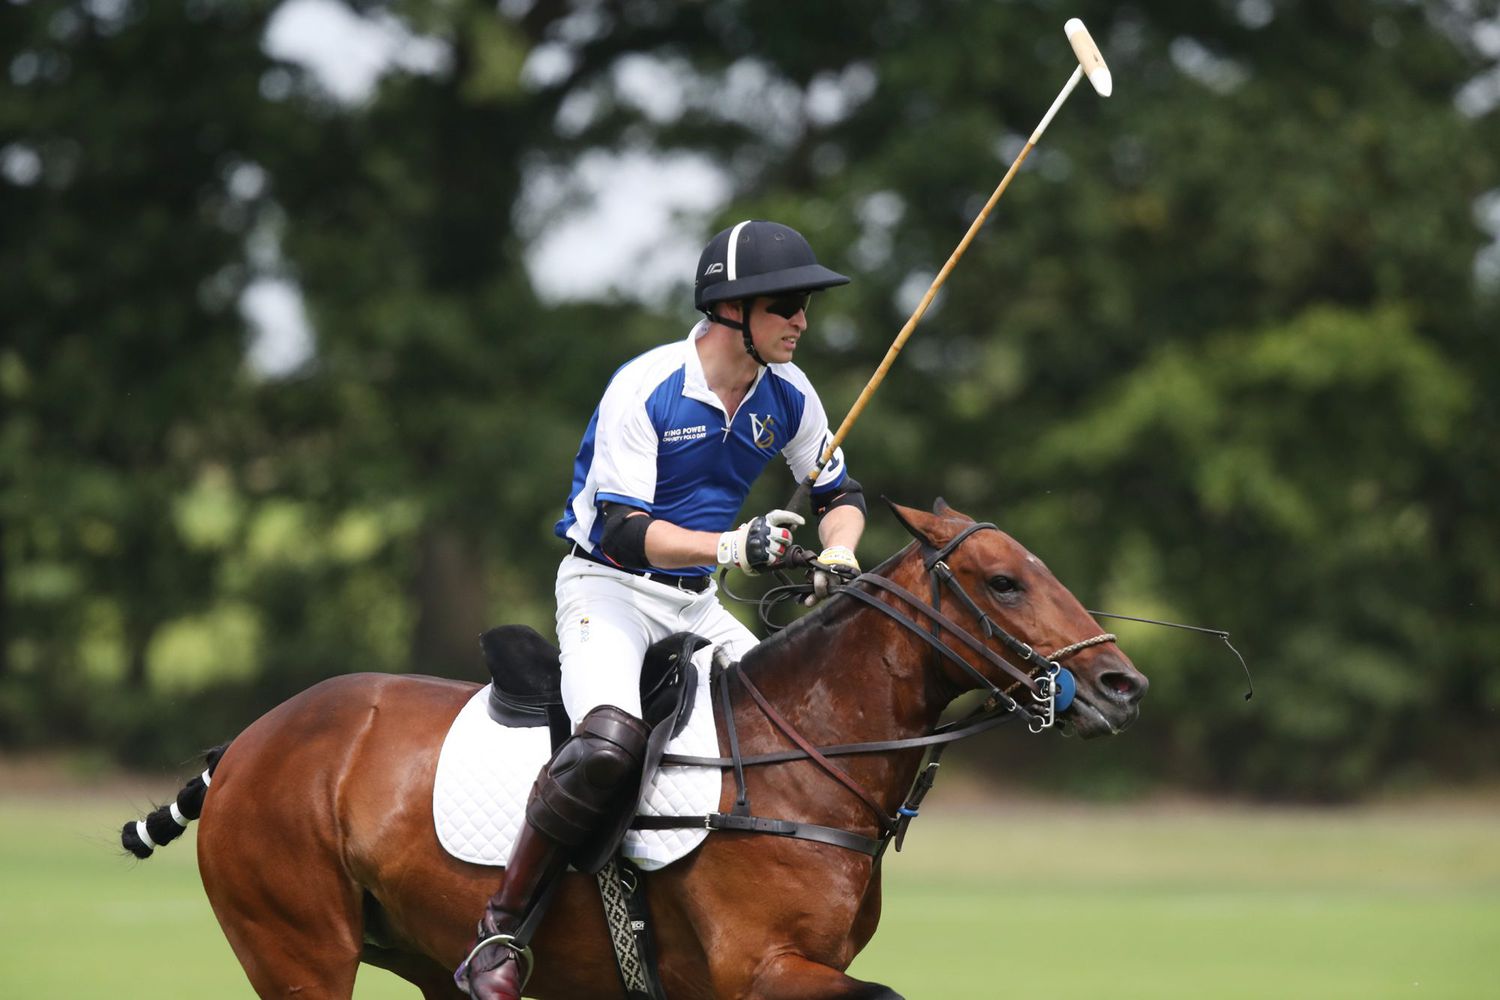 King Power Royal Charity Polo Day